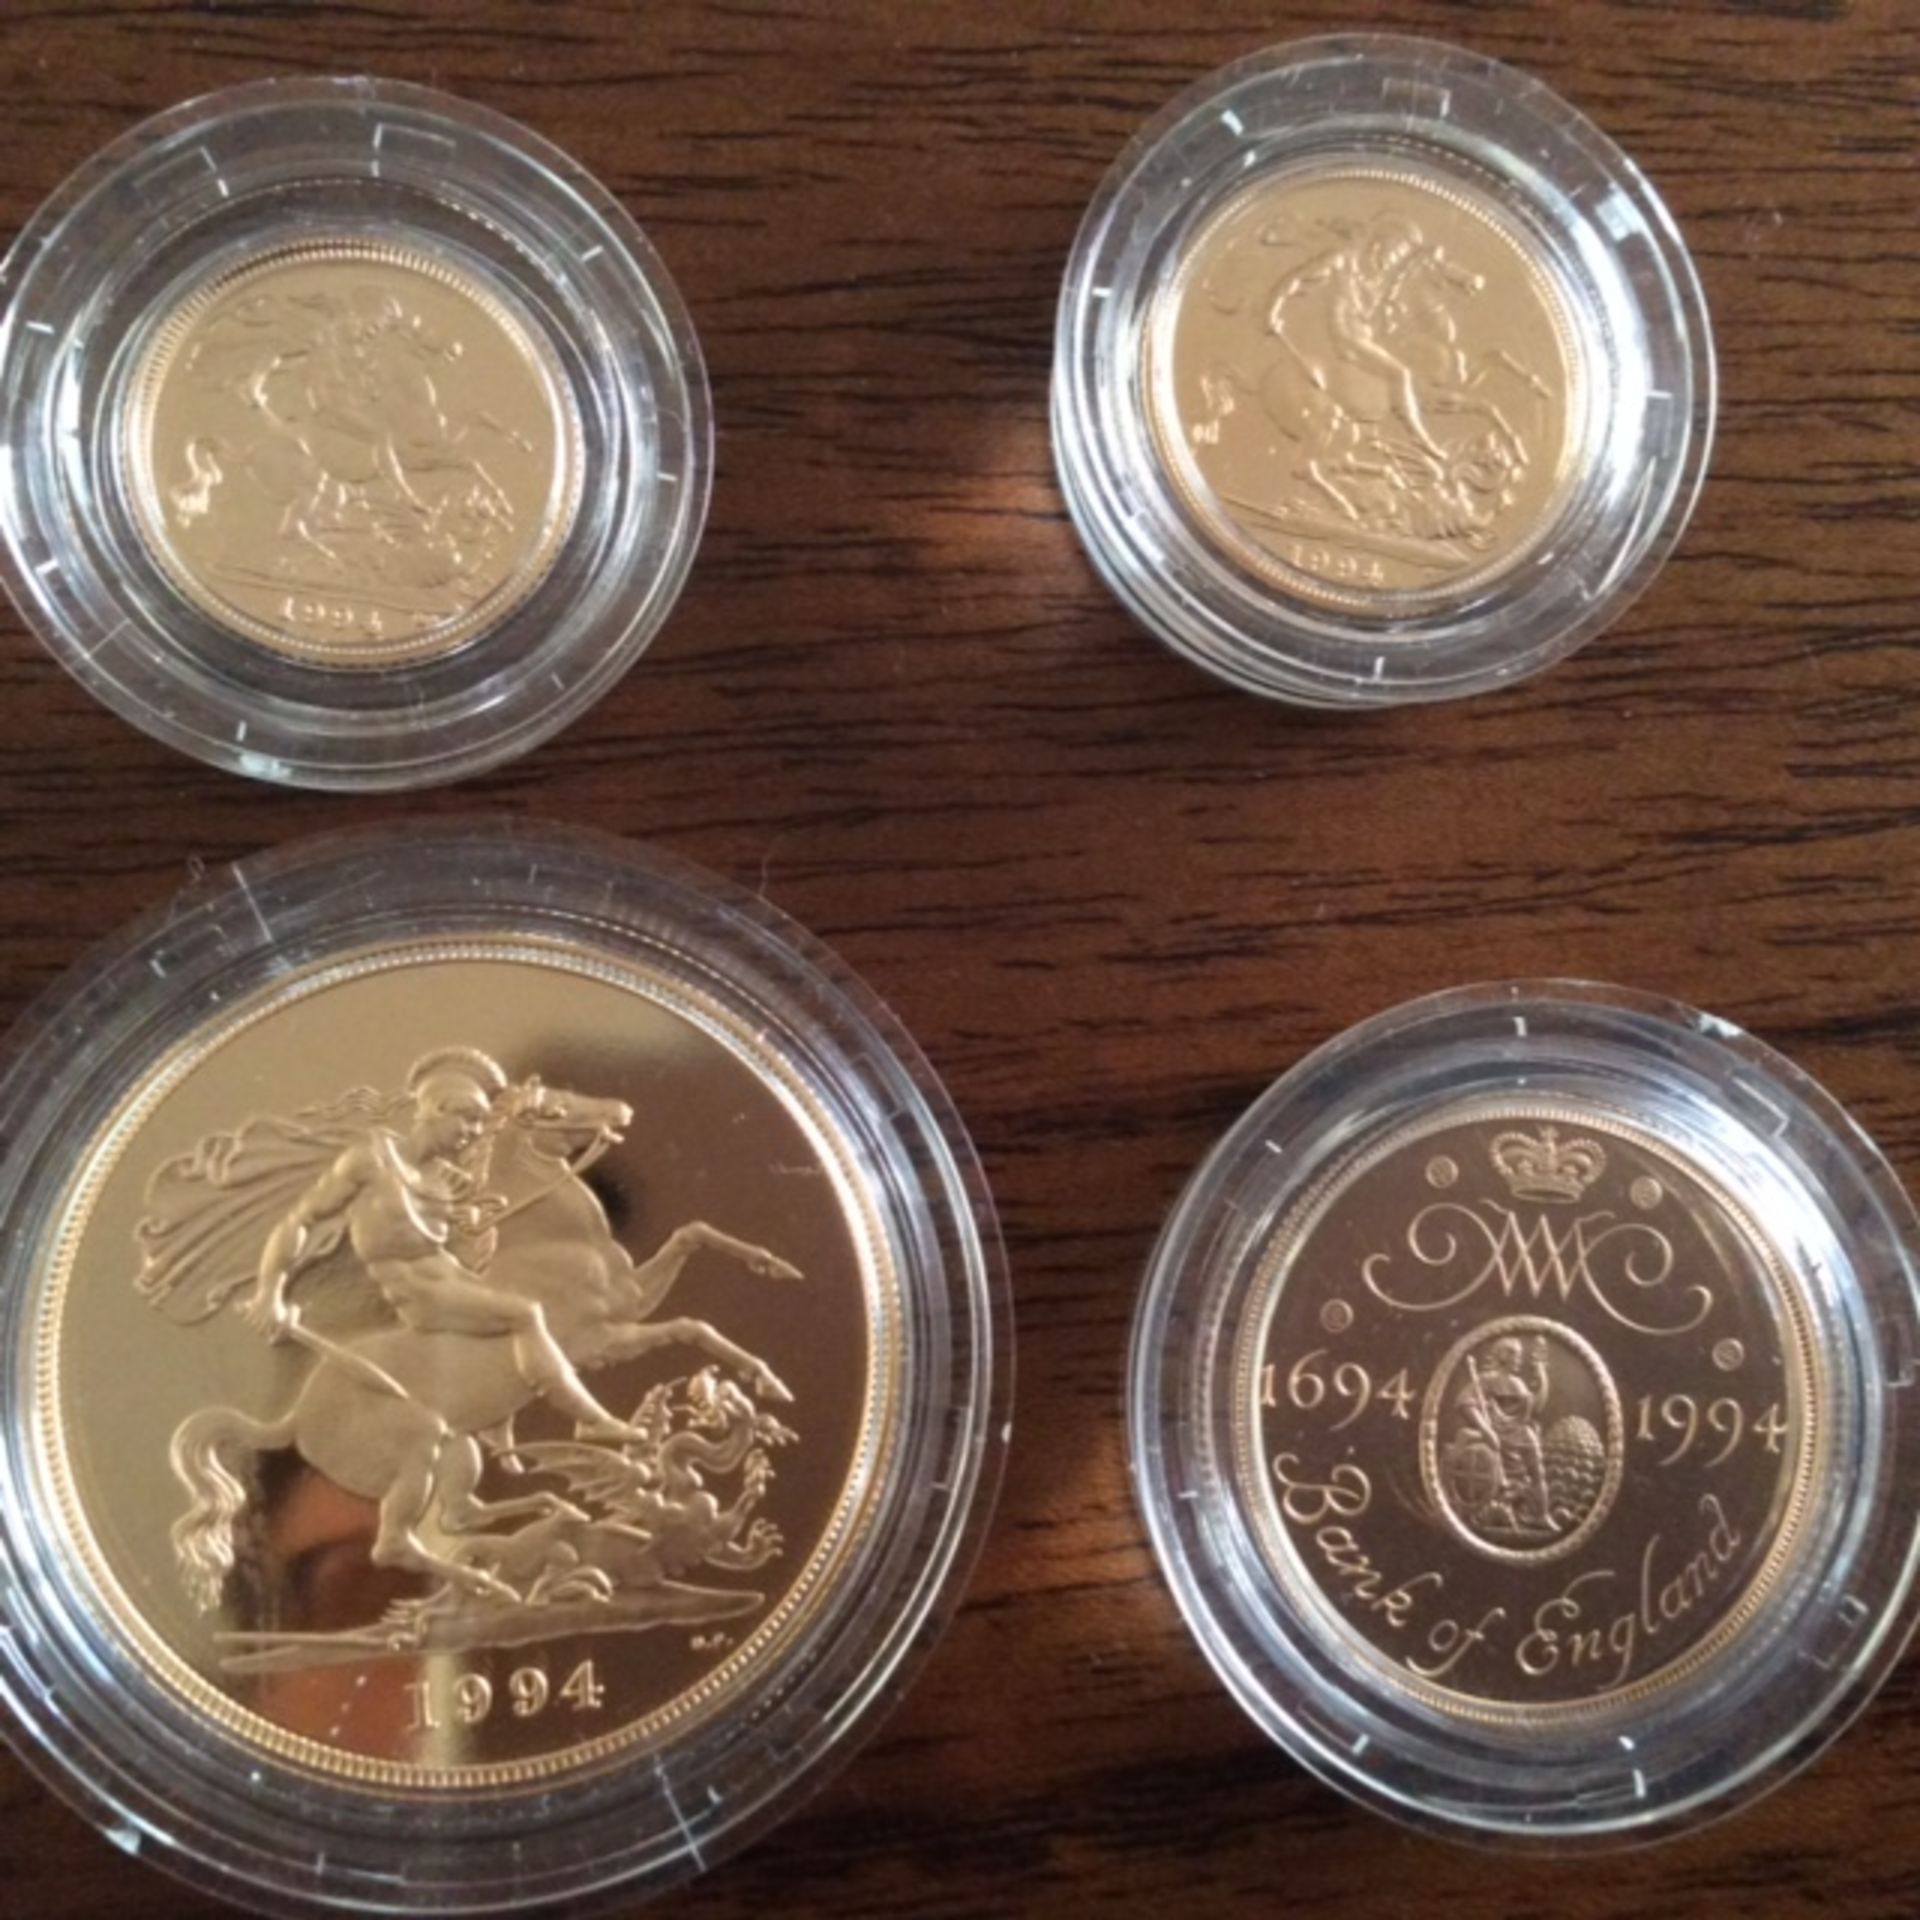 SOVEREIGN 1994 GOLD 4 COIN PROOF SET - CELEBRATING BANK OF ENGLAND TERCENTENARY - Image 4 of 5